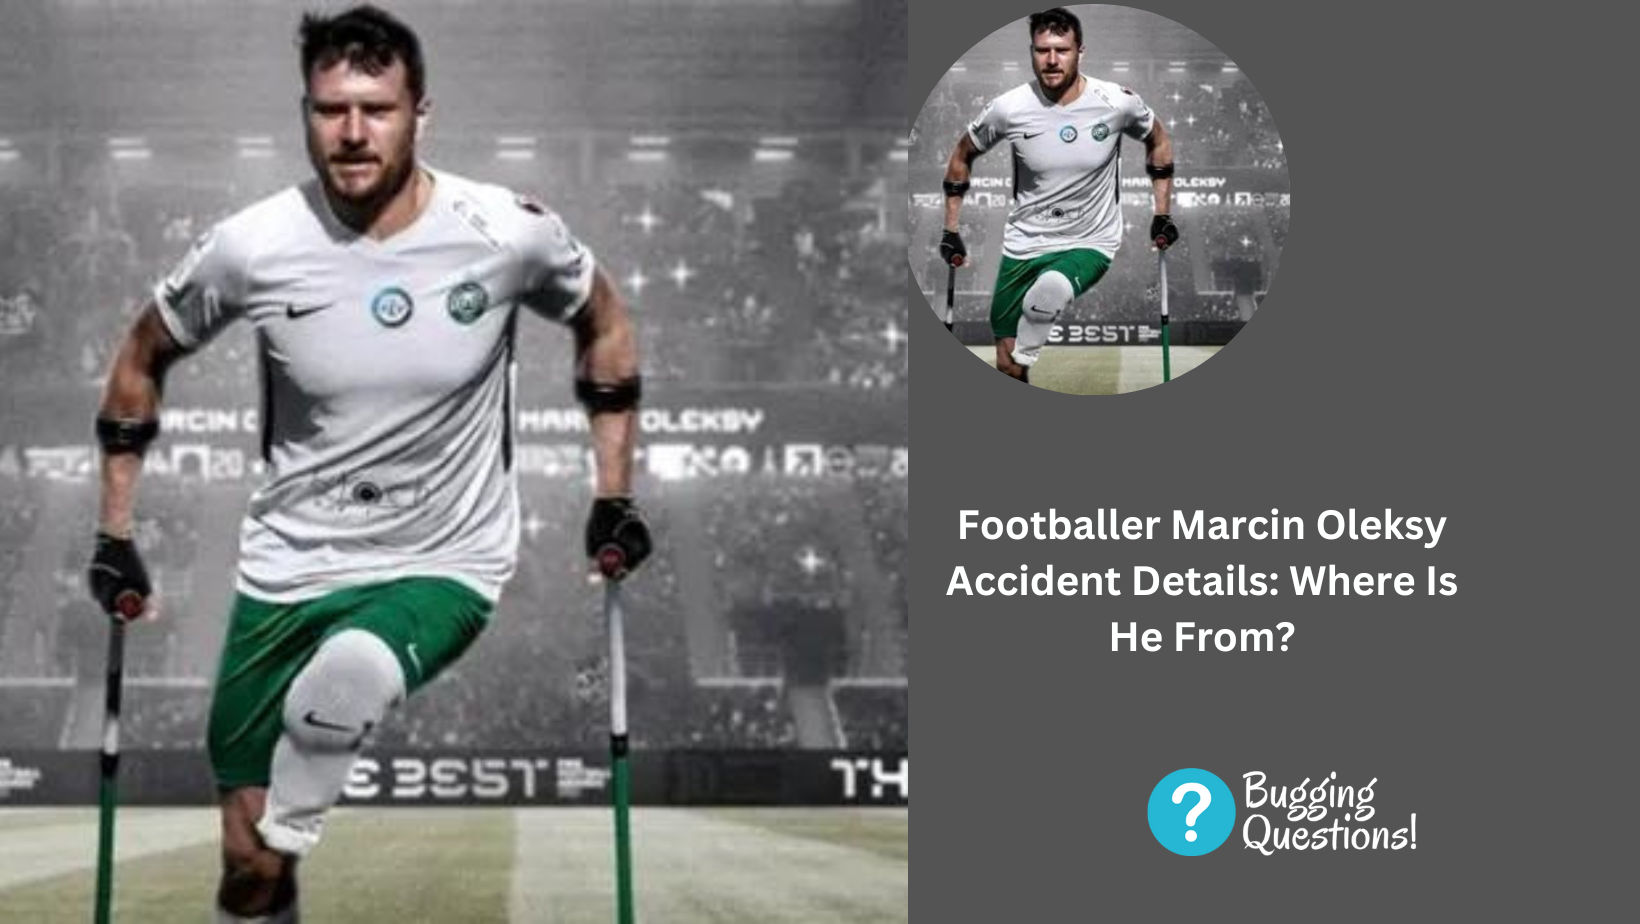 Footballer Marcin Oleksy Accident Details: Where Is He From?